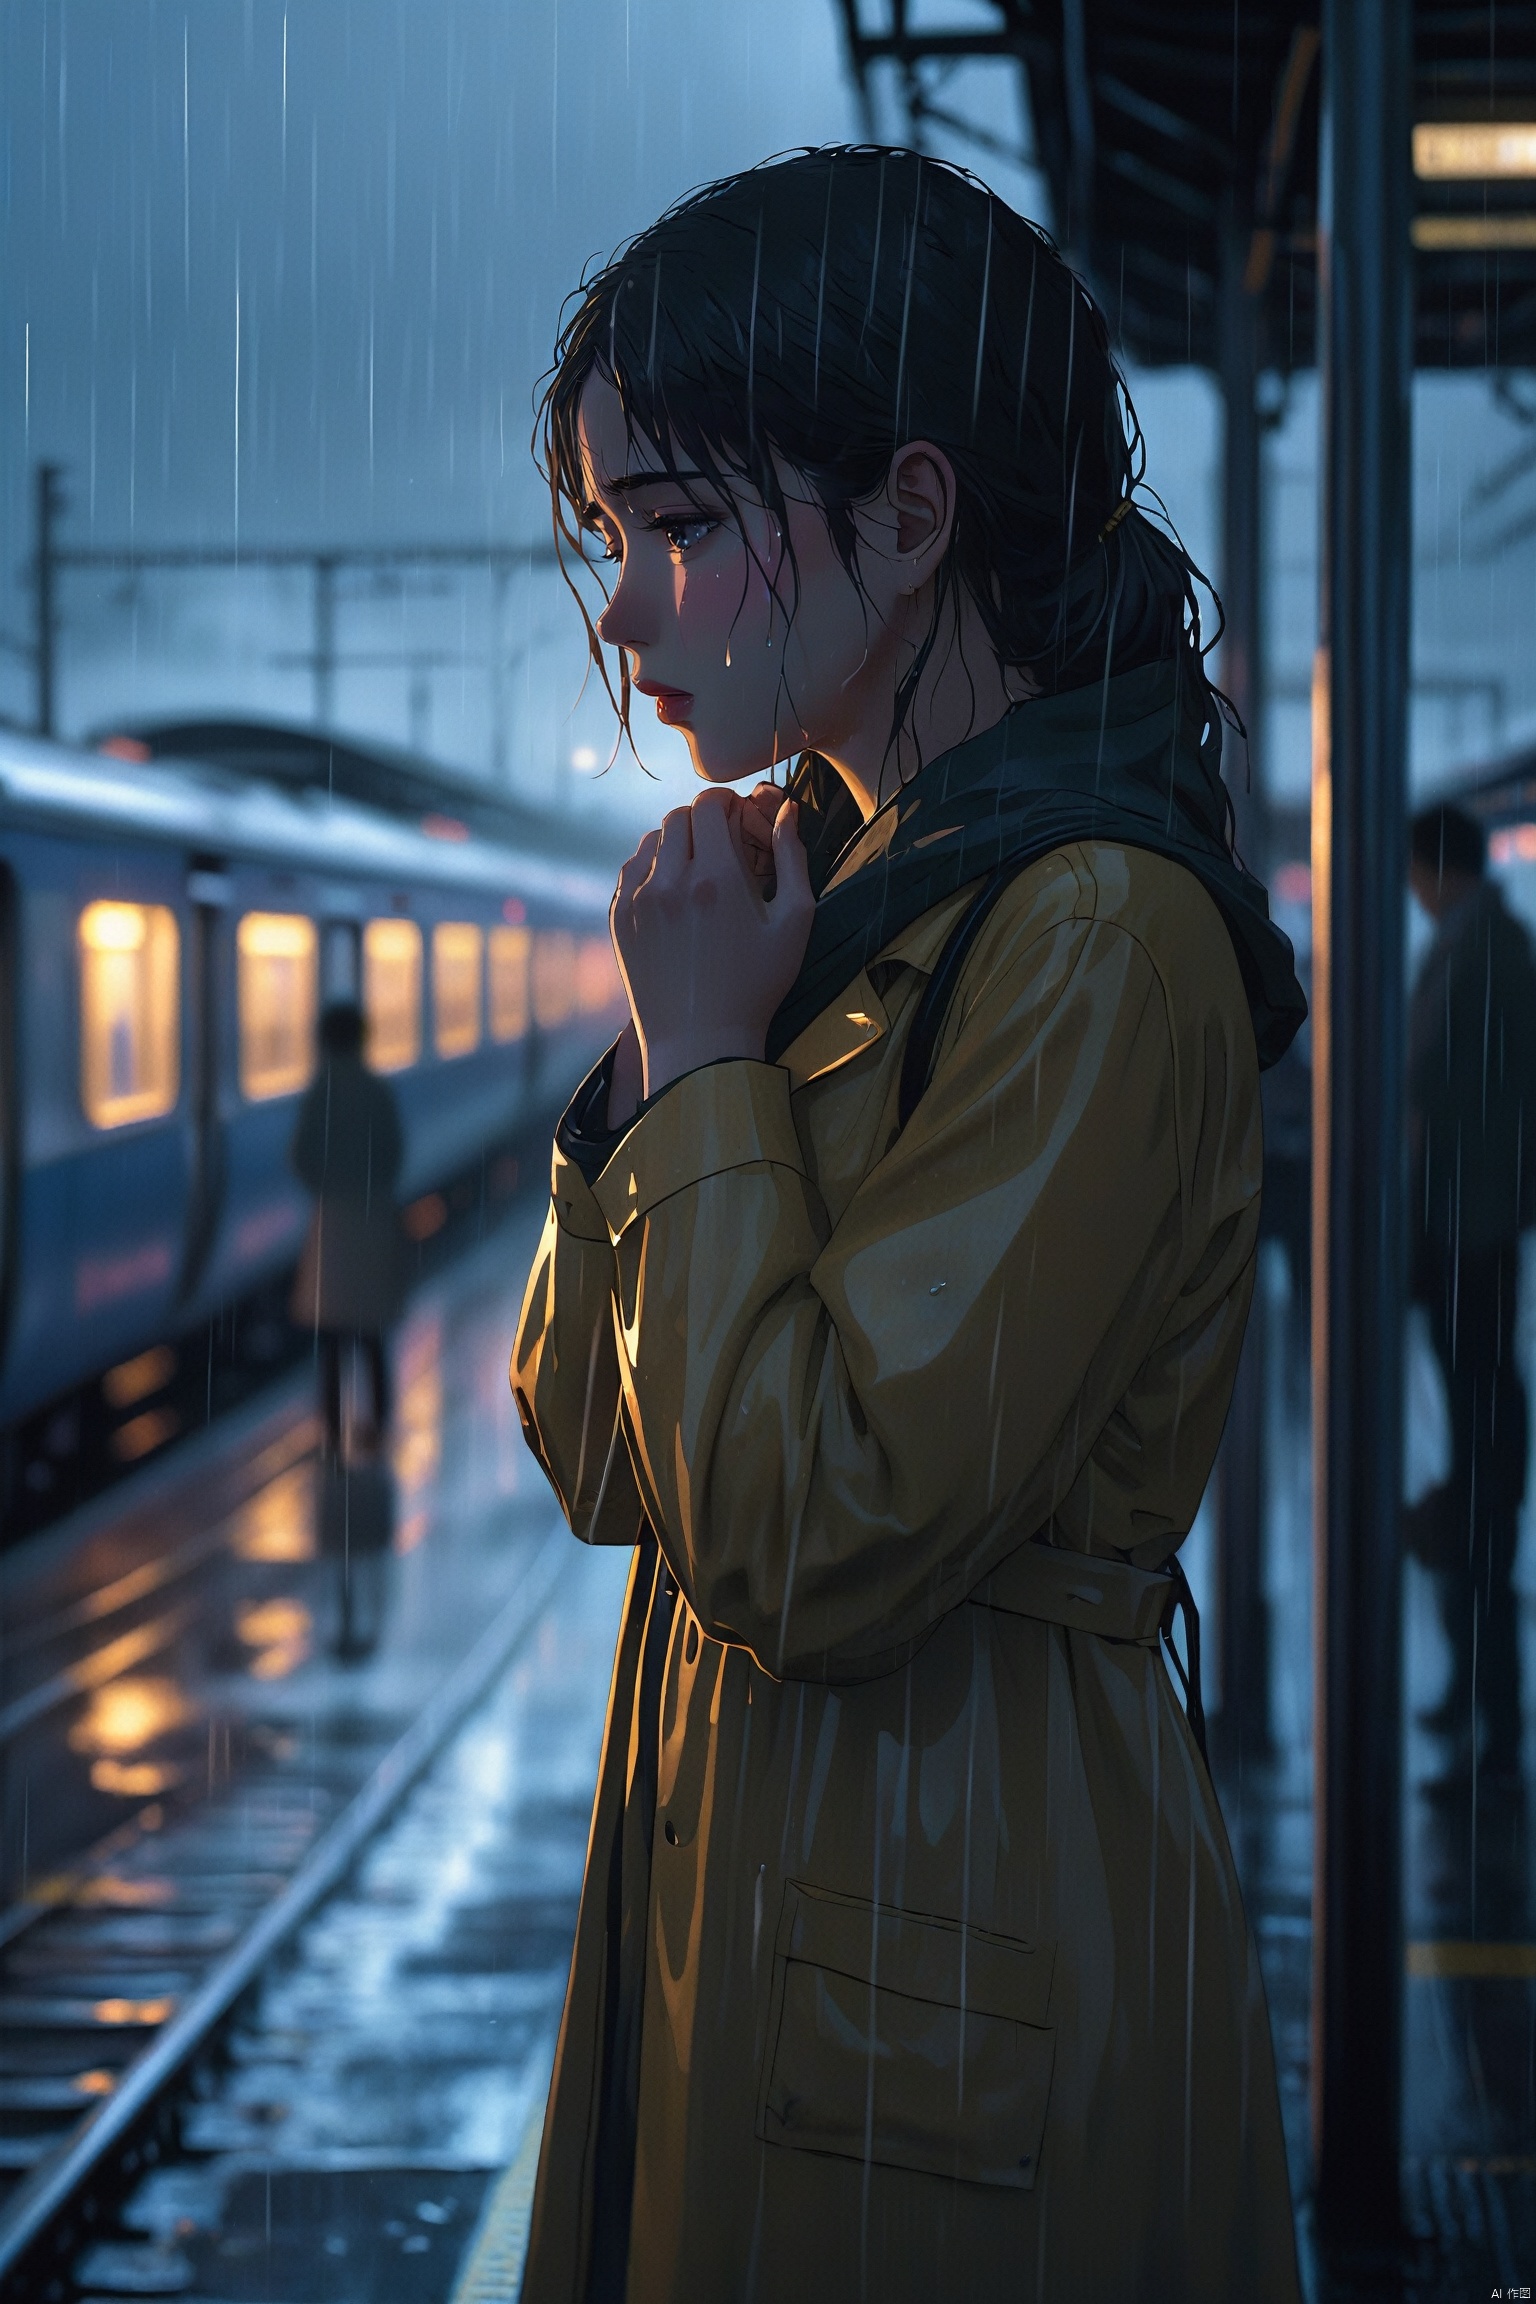 A young woman stands on a rain-soaked train platform, her tears mingling with the rain, blurring her features. Her gaze follows the departing train, her handkerchief clutched tightly as if suppressing deep sorrow. The platform lights appear particularly dim in the rain, and her silhouette is especially lonely under the glow.
